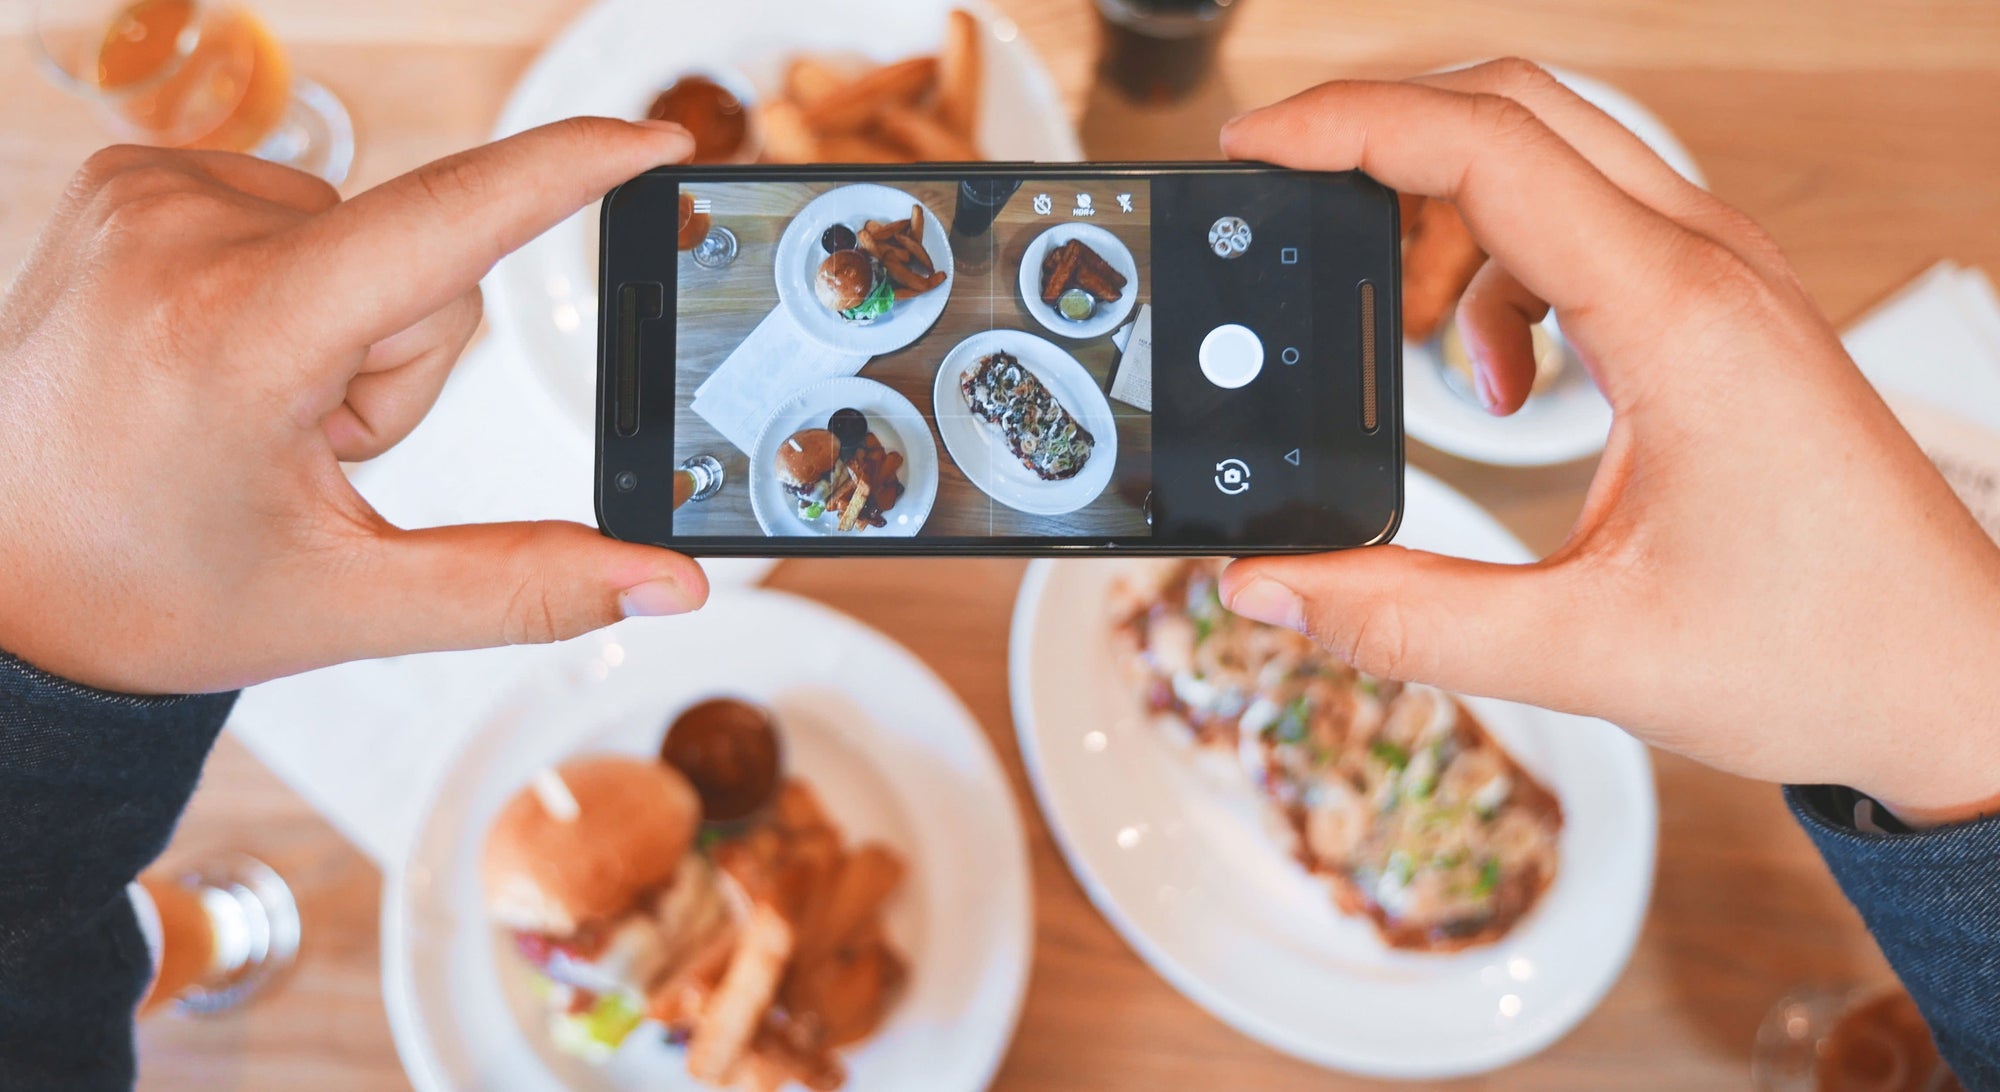 7 Tips for Better Smartphone Photos